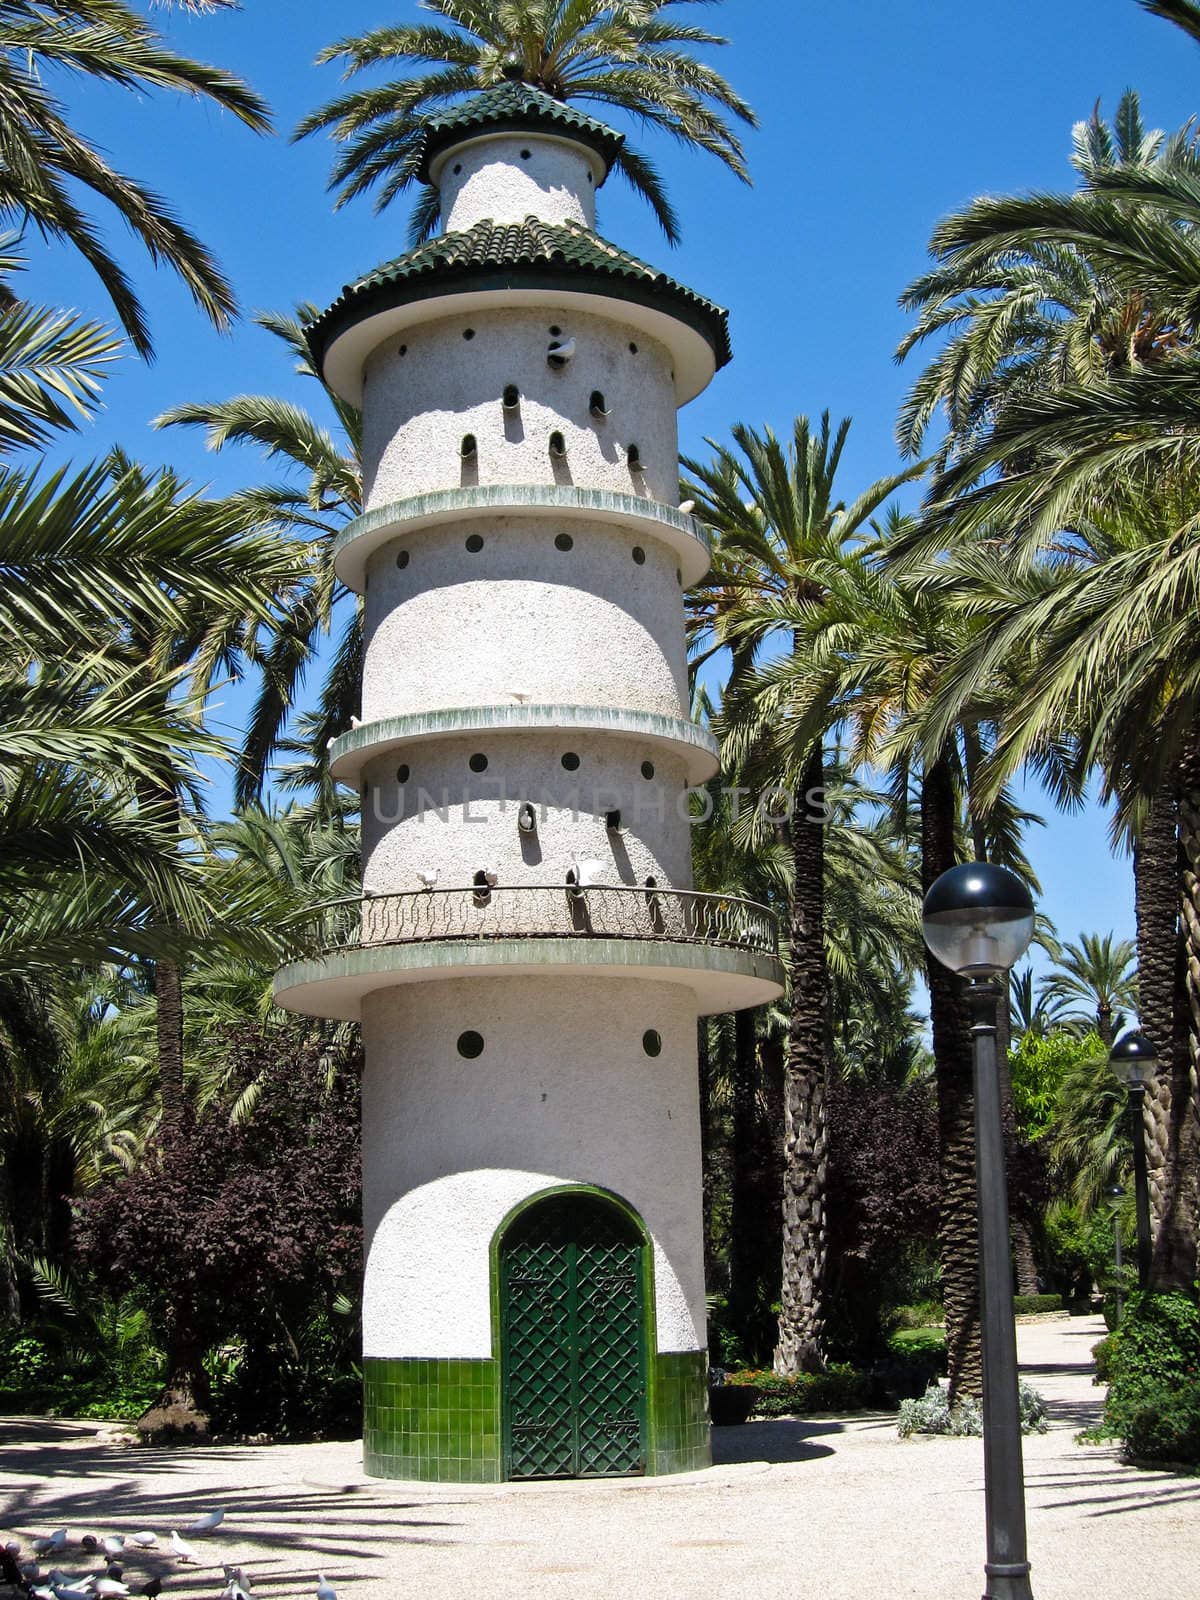 Dovecote tower with doves in a park in Elche, Spain